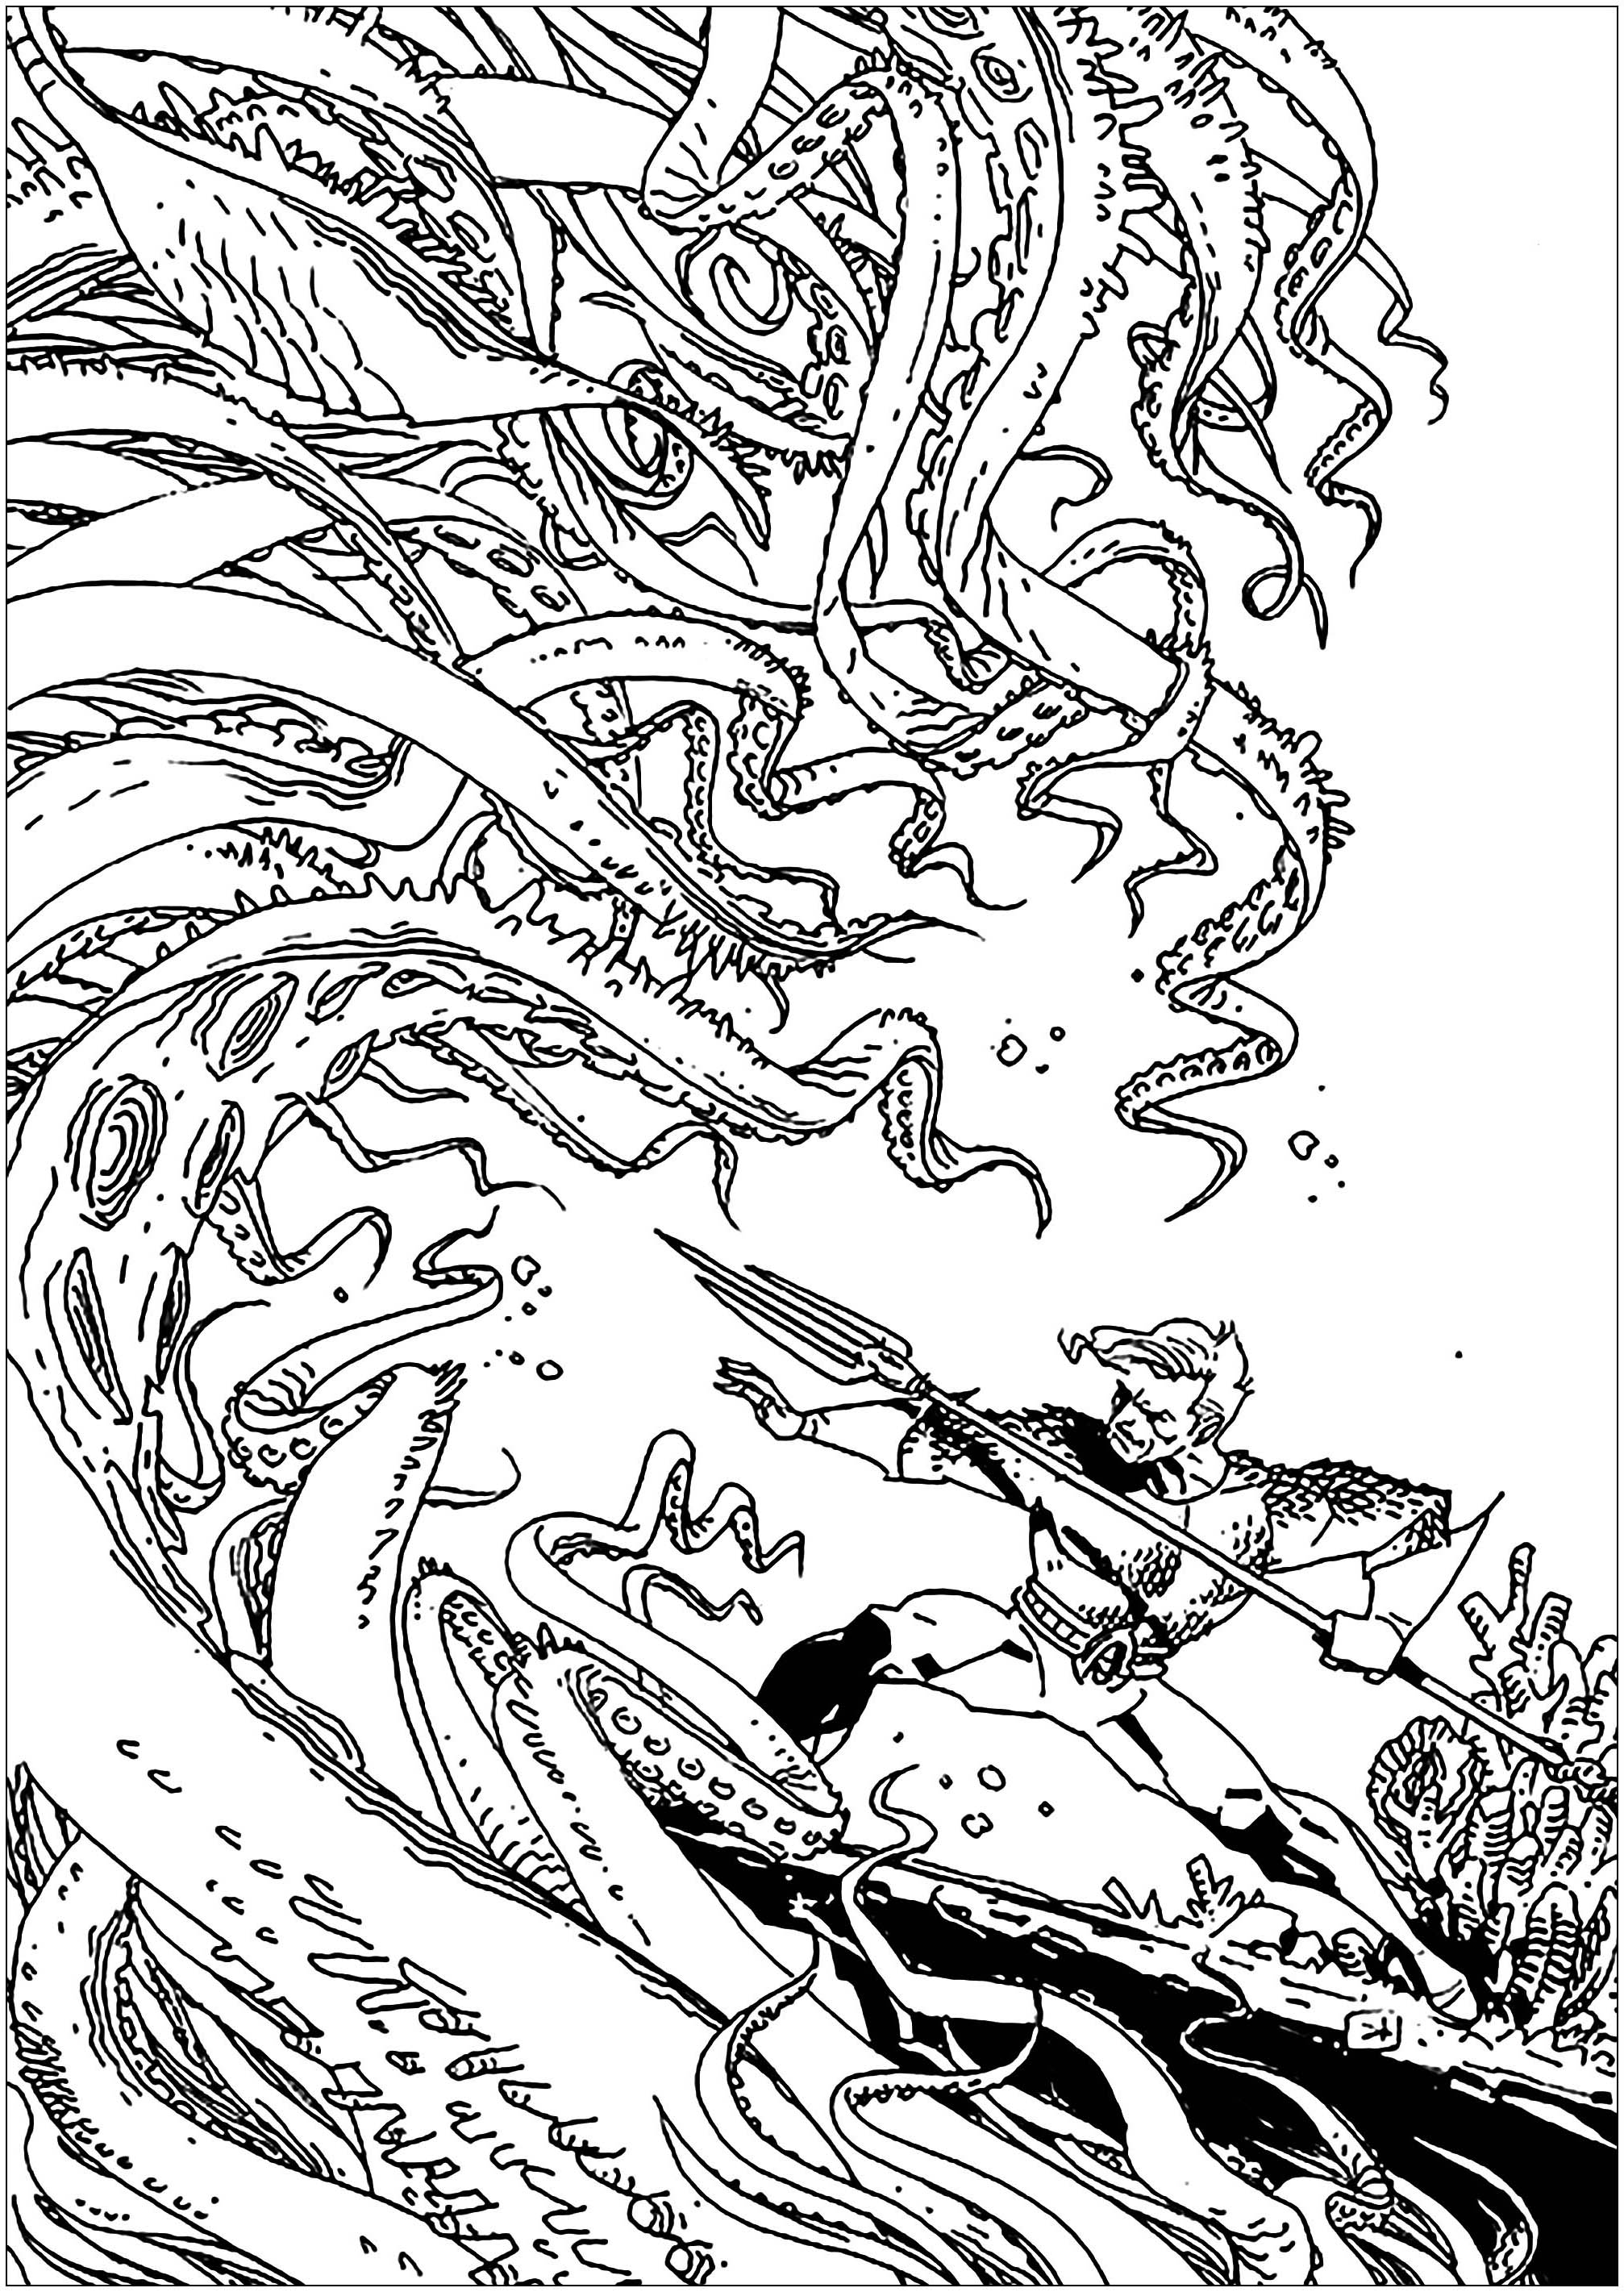 Free Aquaman coloring page to download, for children